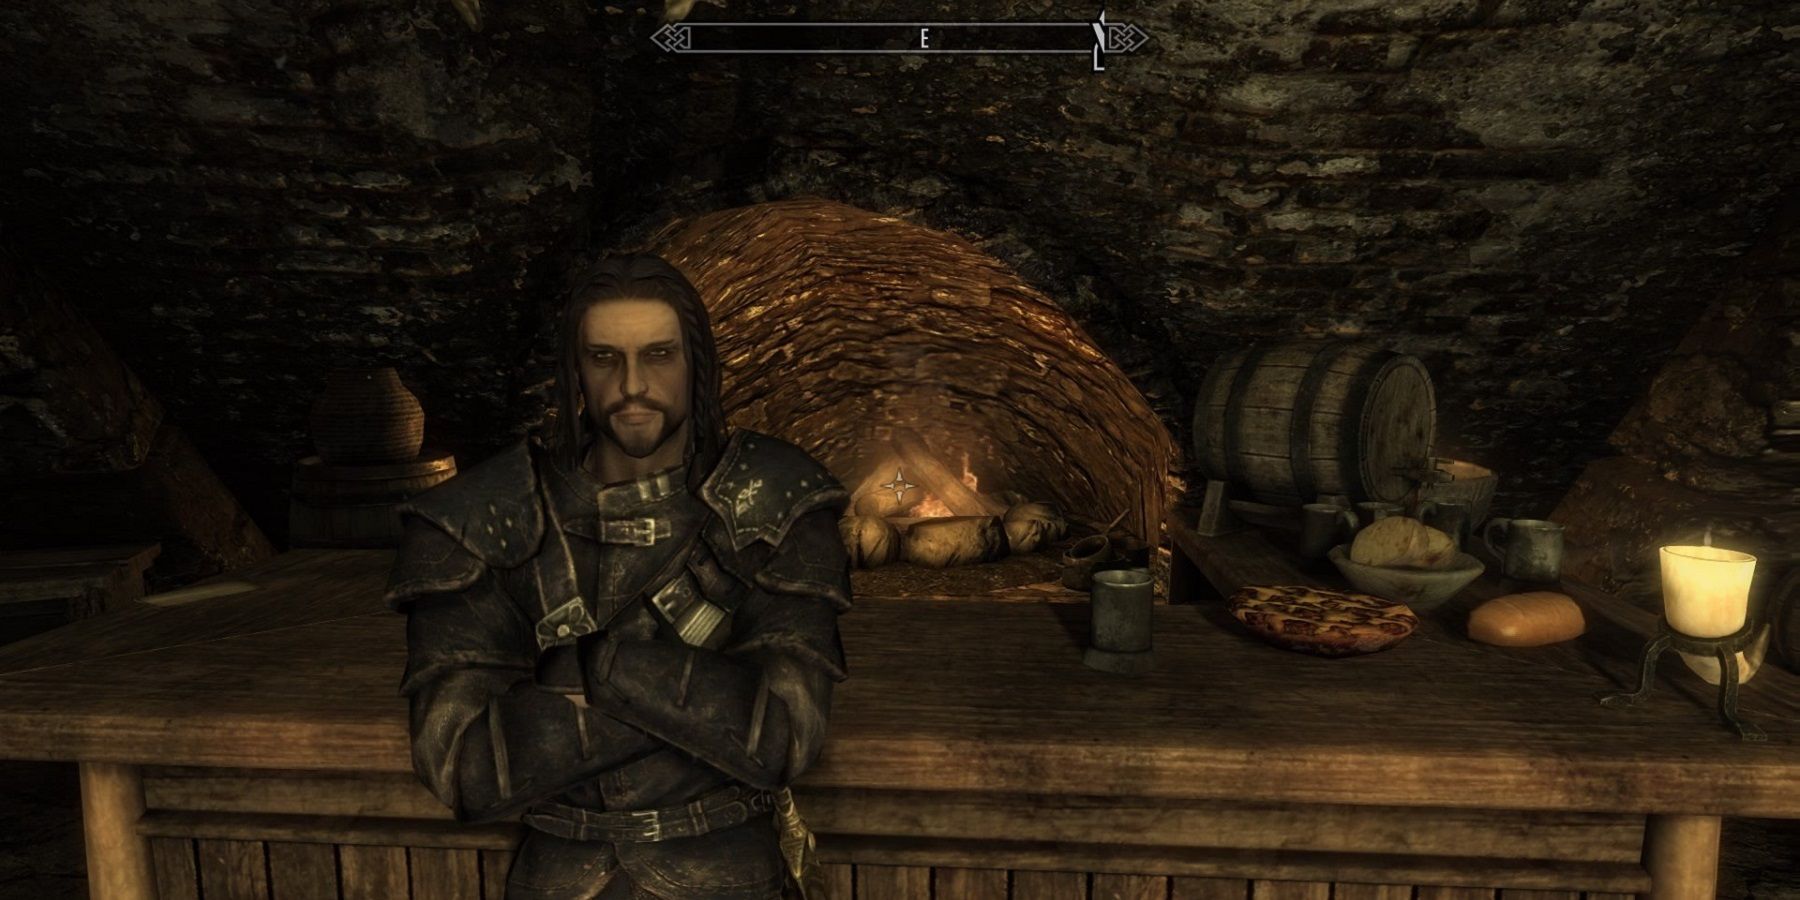 Screenshot from Skyrim showing a thief leaning against a bar in the Thieve's Den.